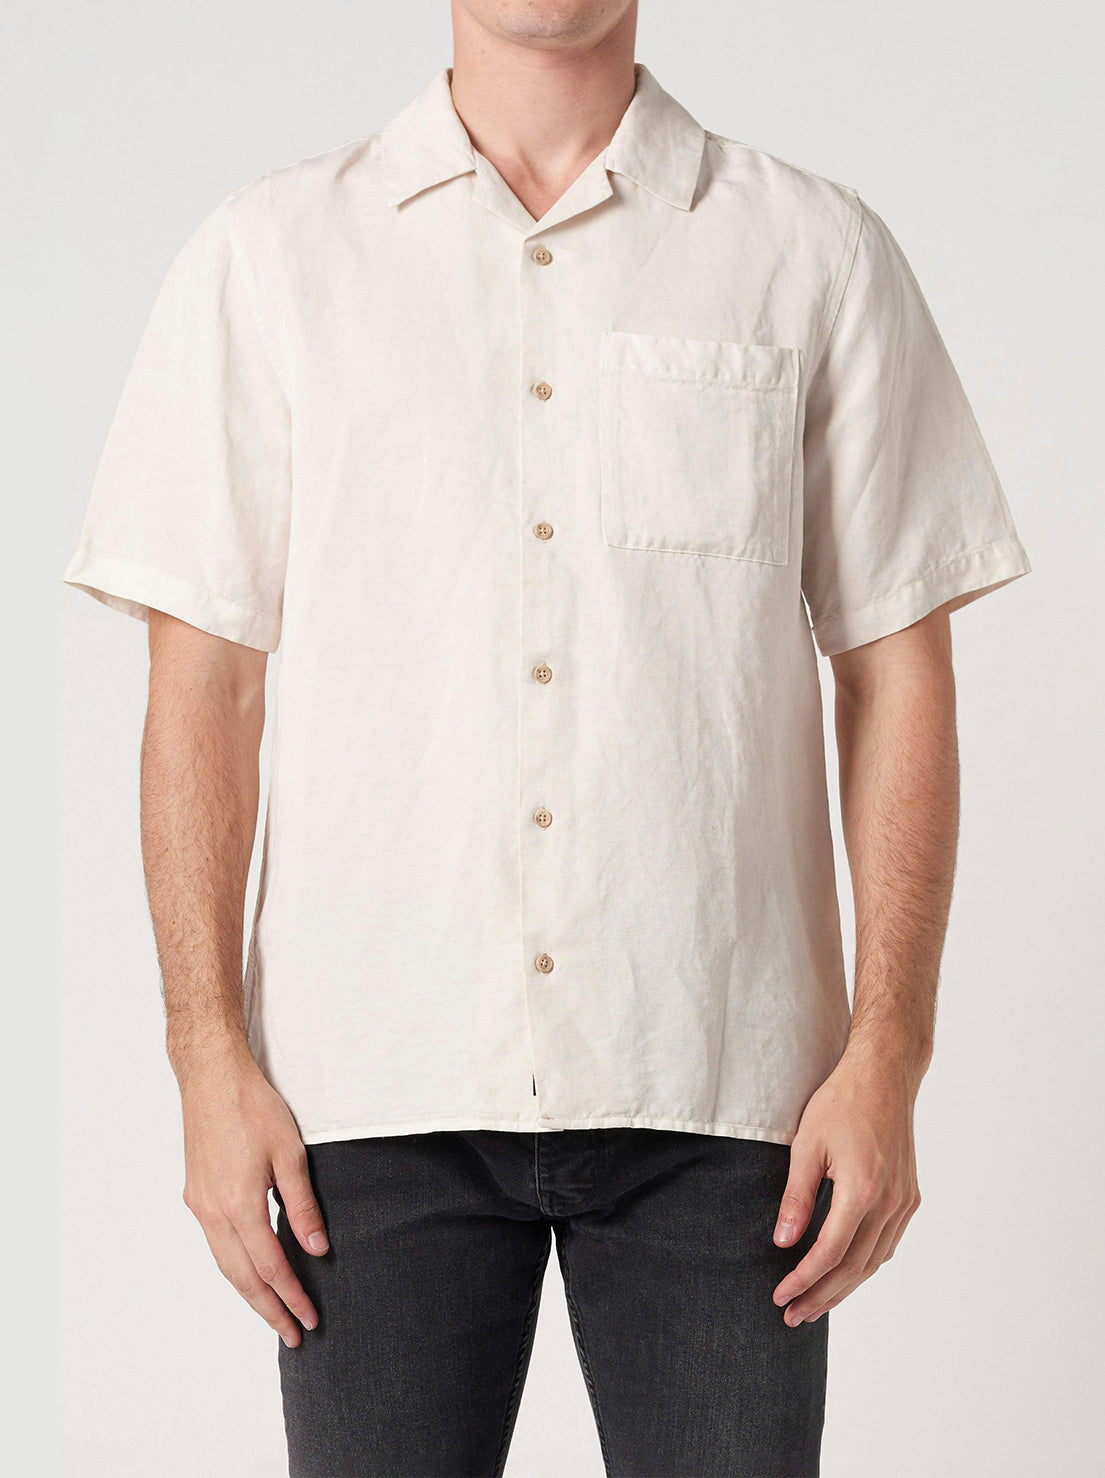 Neuw - Curtis S/S Check Shirt - Washed Stone